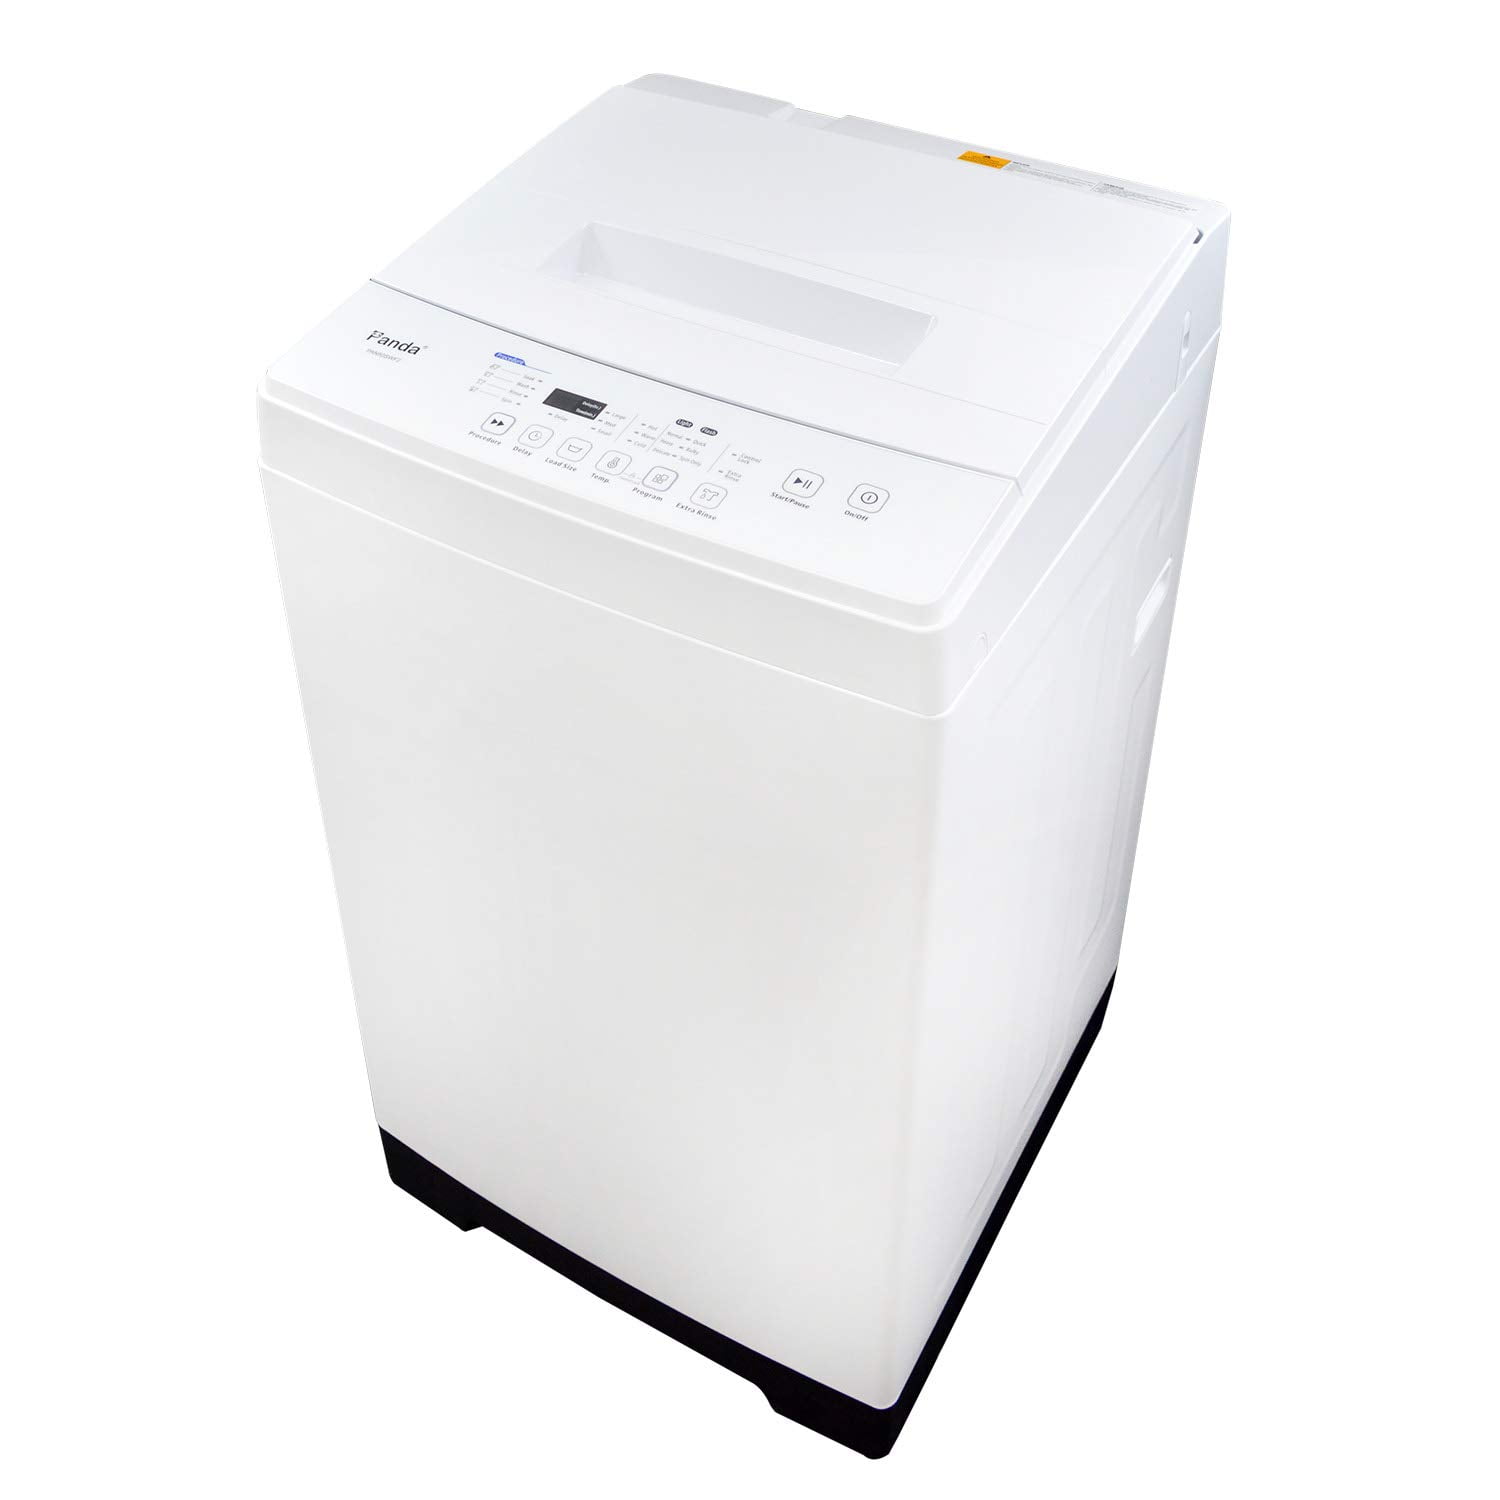 GOLDEN Washer 1.6 Cu Ft Portable Washing Machine Top Load - FW50